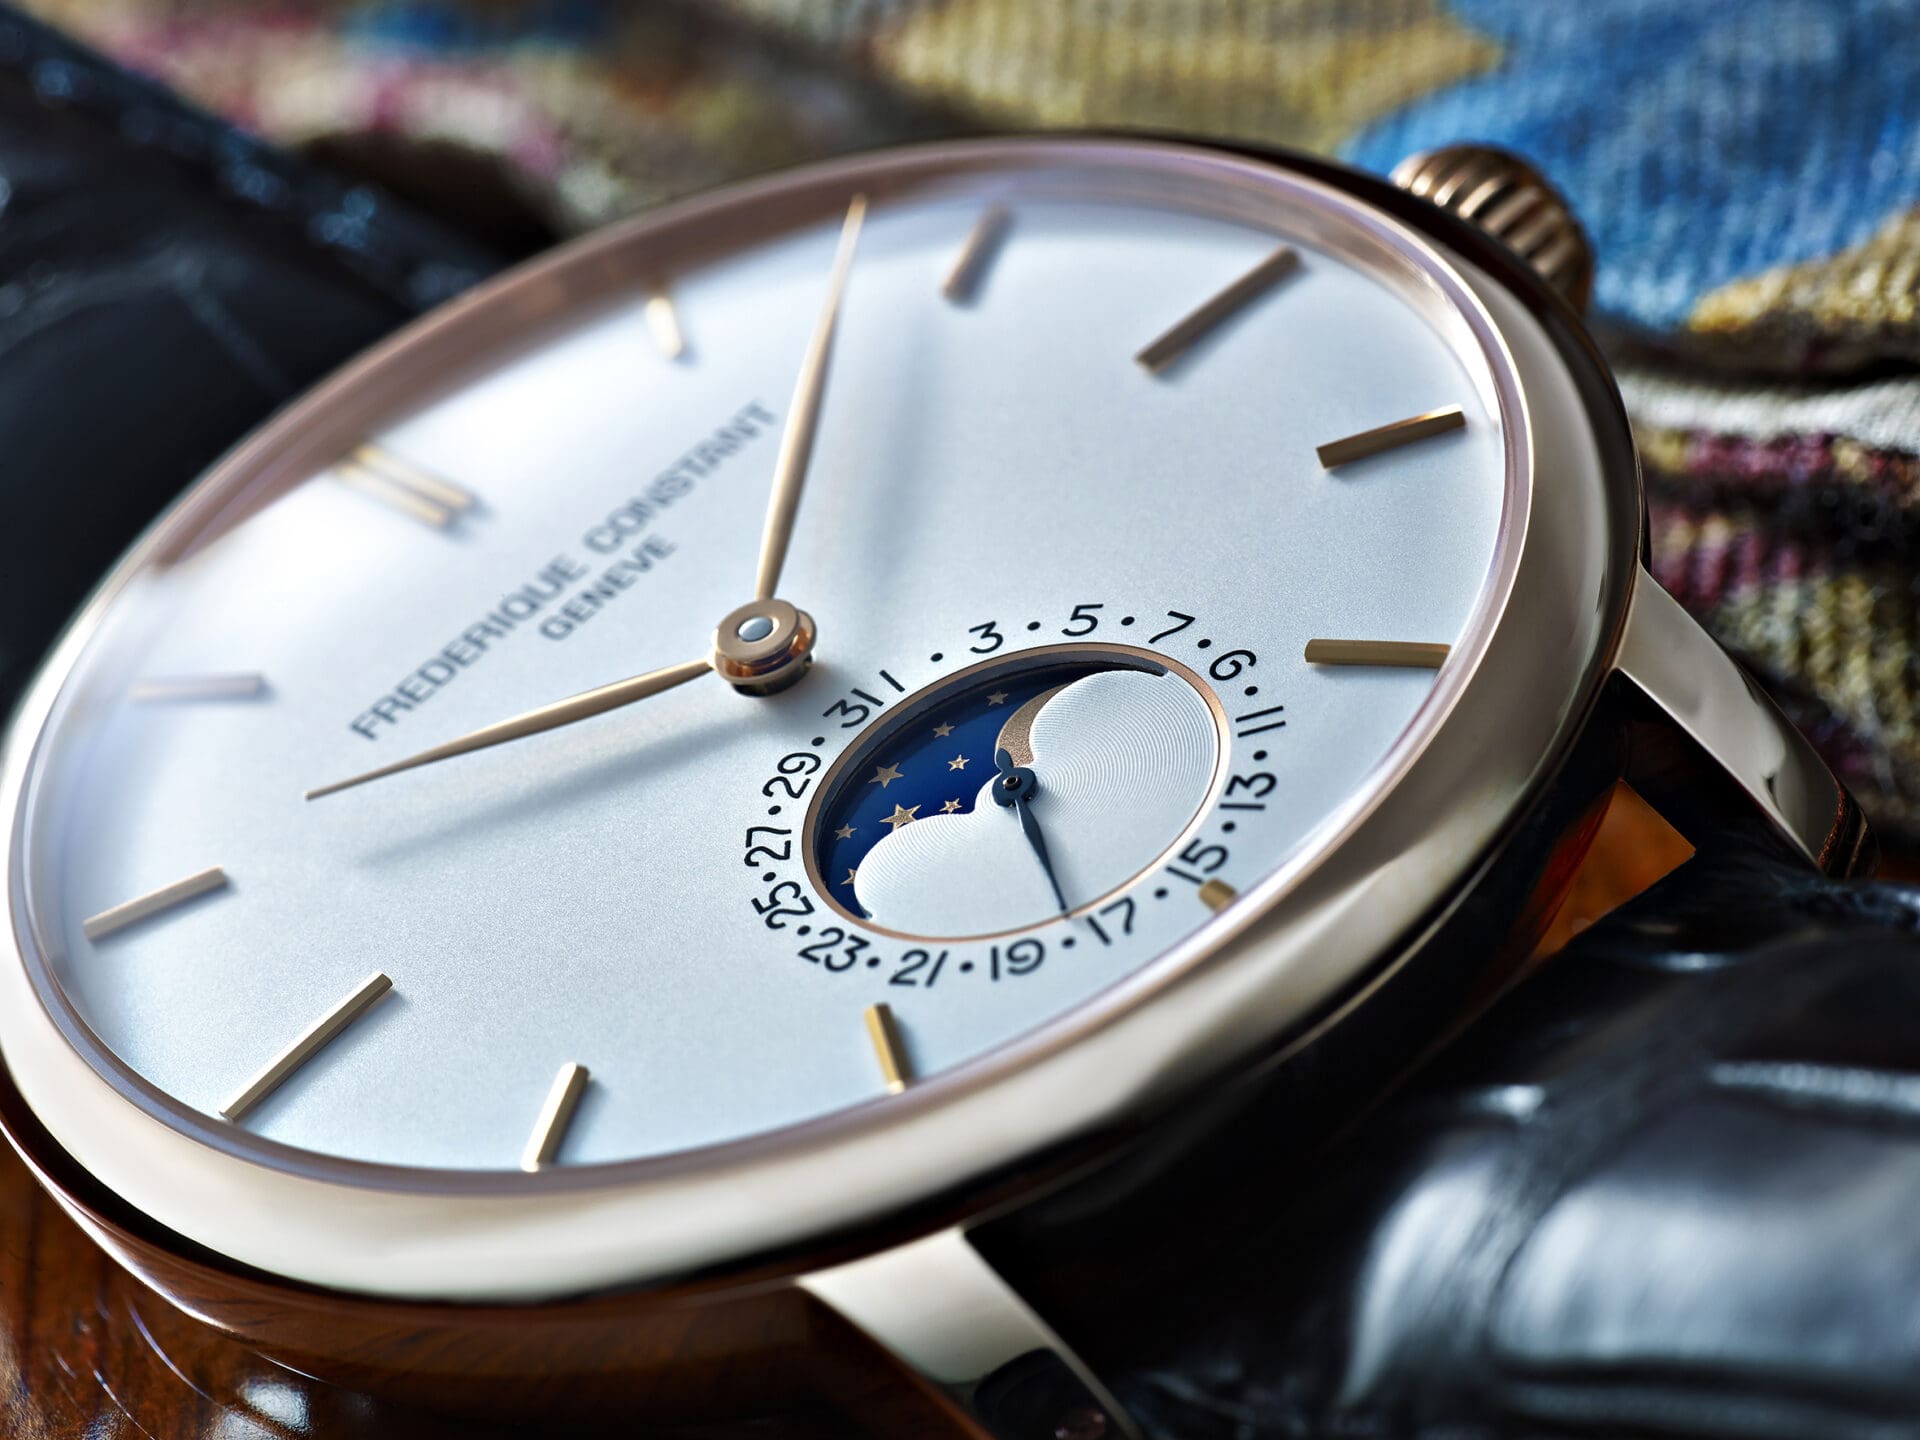 INDUSTRY NEWS: Frederique Constant’s ‘accessible luxury’ pays off